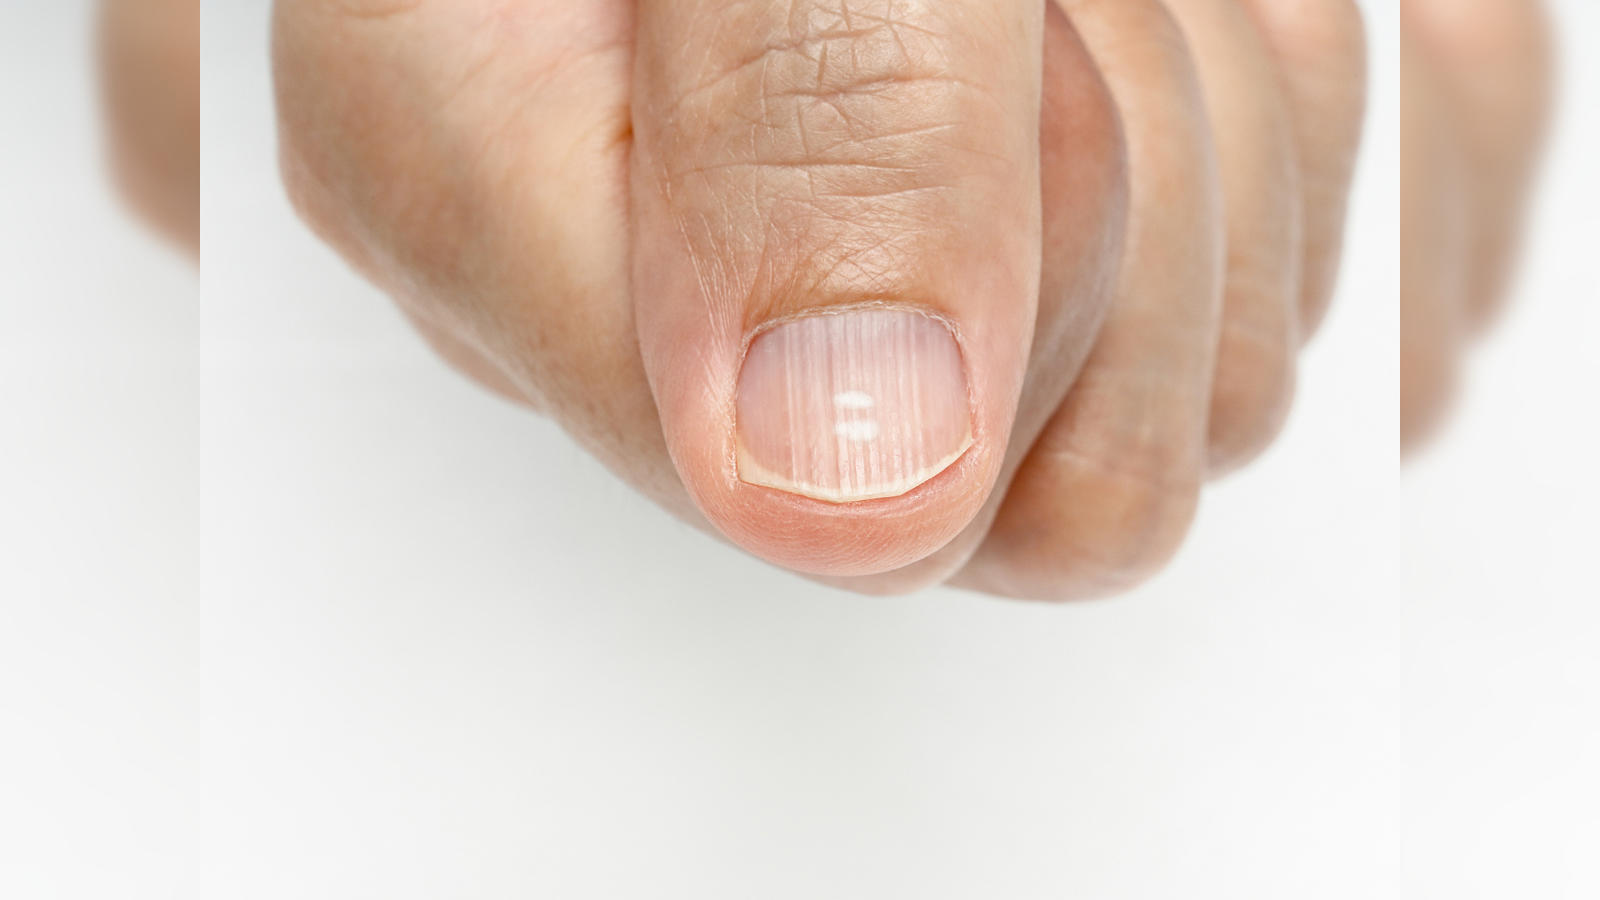 What Do Your Brittle Nails Say About Your Health?